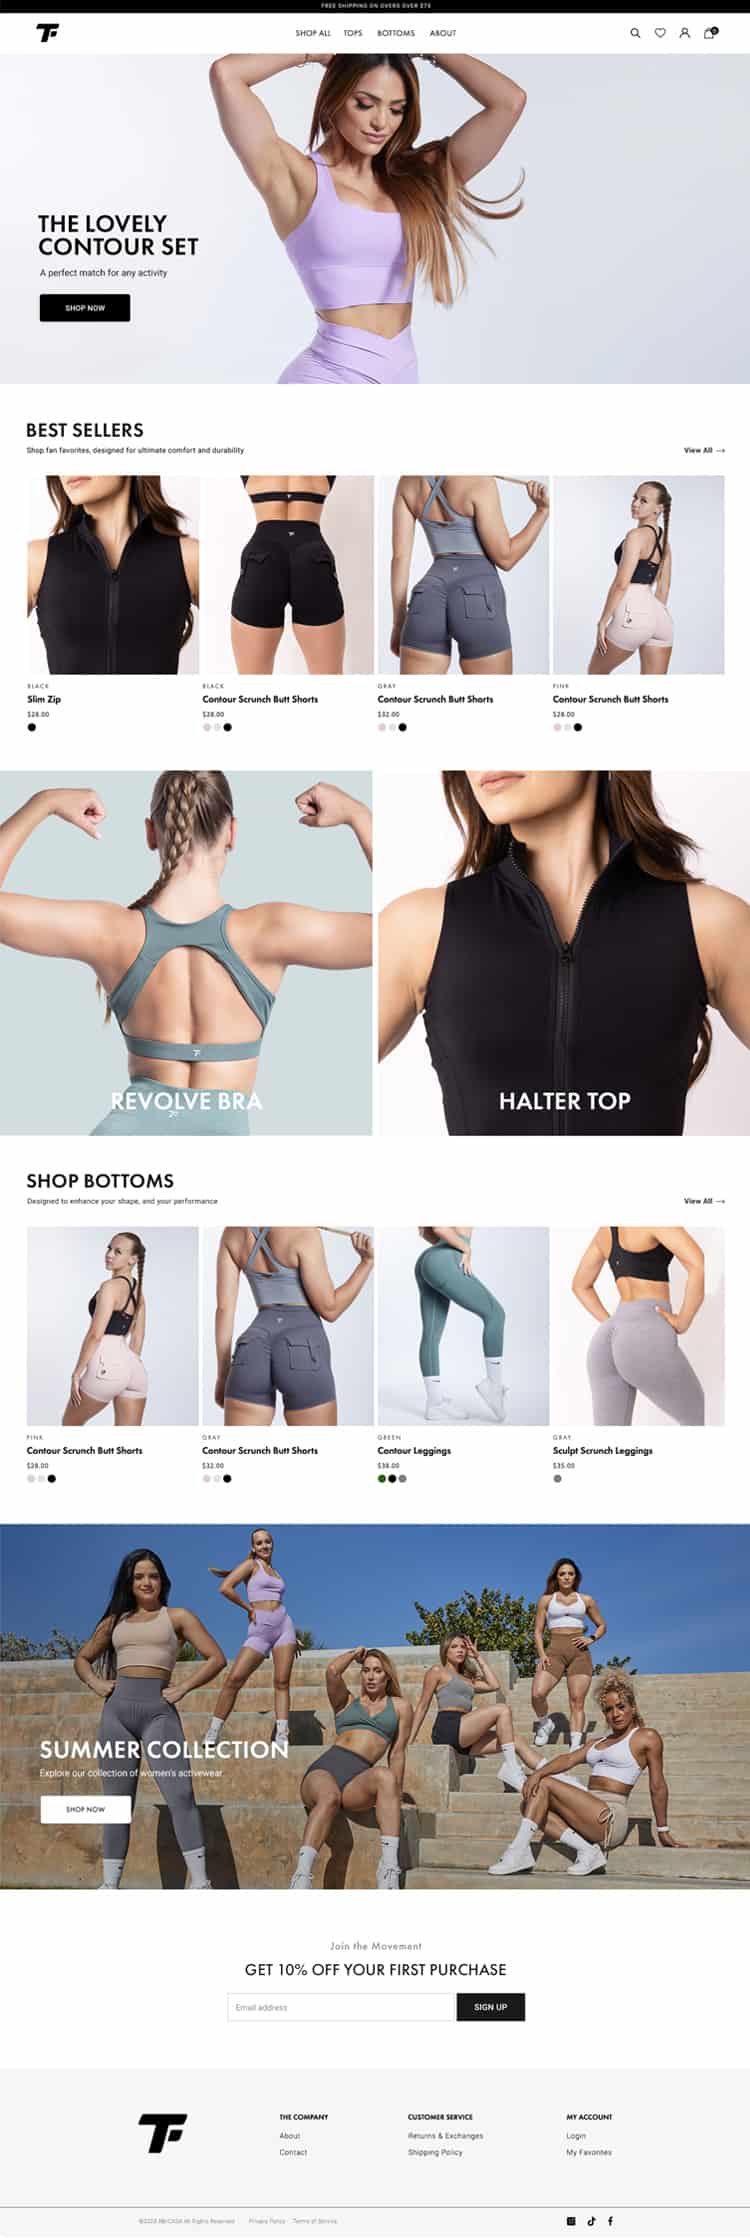 Miami Shopify Website Design for Taneth Fit by Fuze Digital.